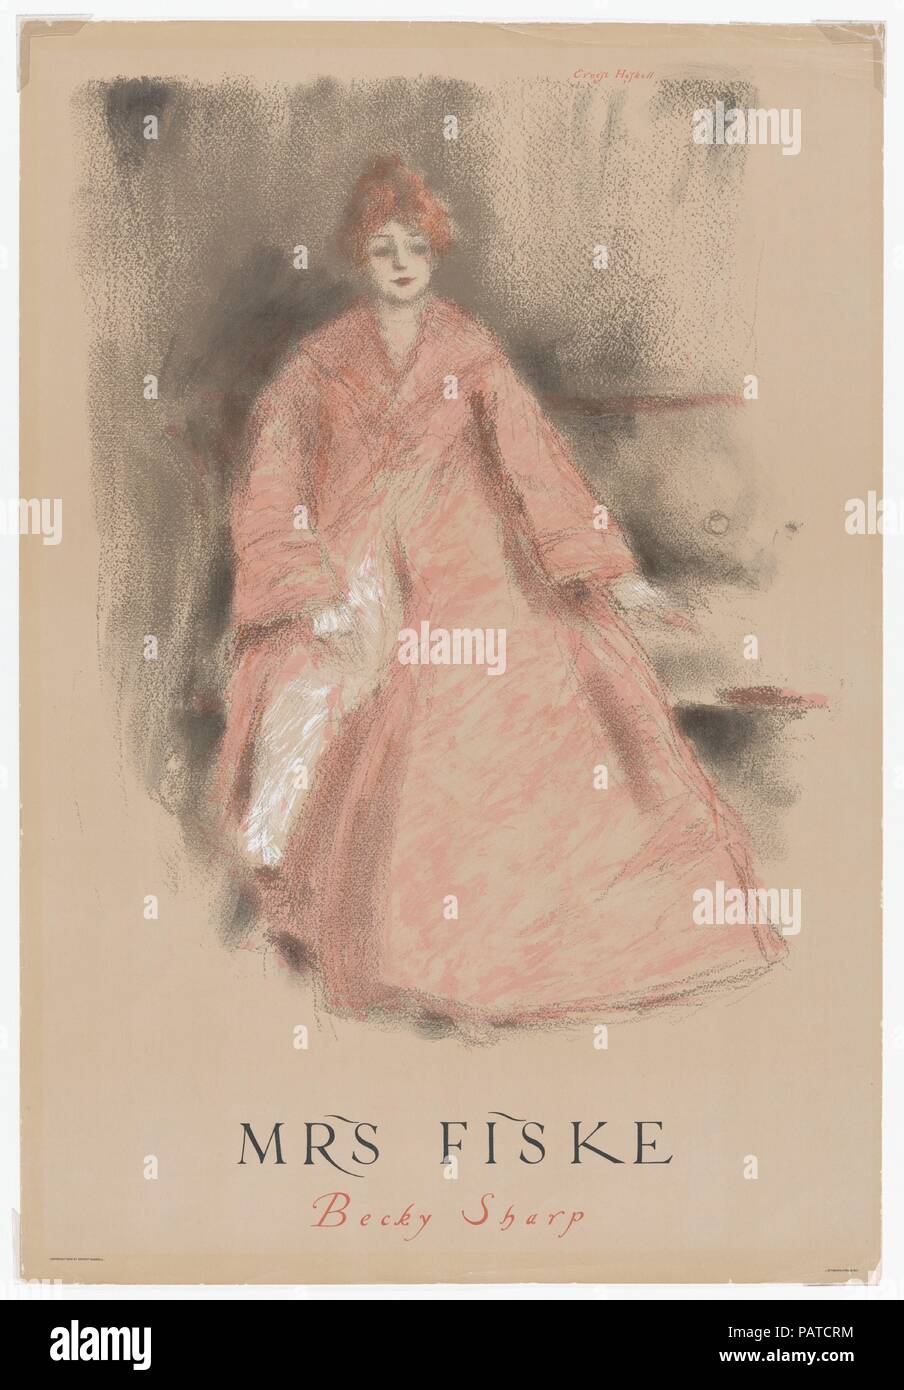 Mrs. Fiske, Becky Sharp. Artist: Ernest Haskell (American, Woodstock, Connecticut 1876-1925 West Point, Maine). Dimensions: Sheet: 22 × 15 in. (55.9 × 38.1 cm). Date: 1899. Museum: Metropolitan Museum of Art, New York, USA. Stock Photo